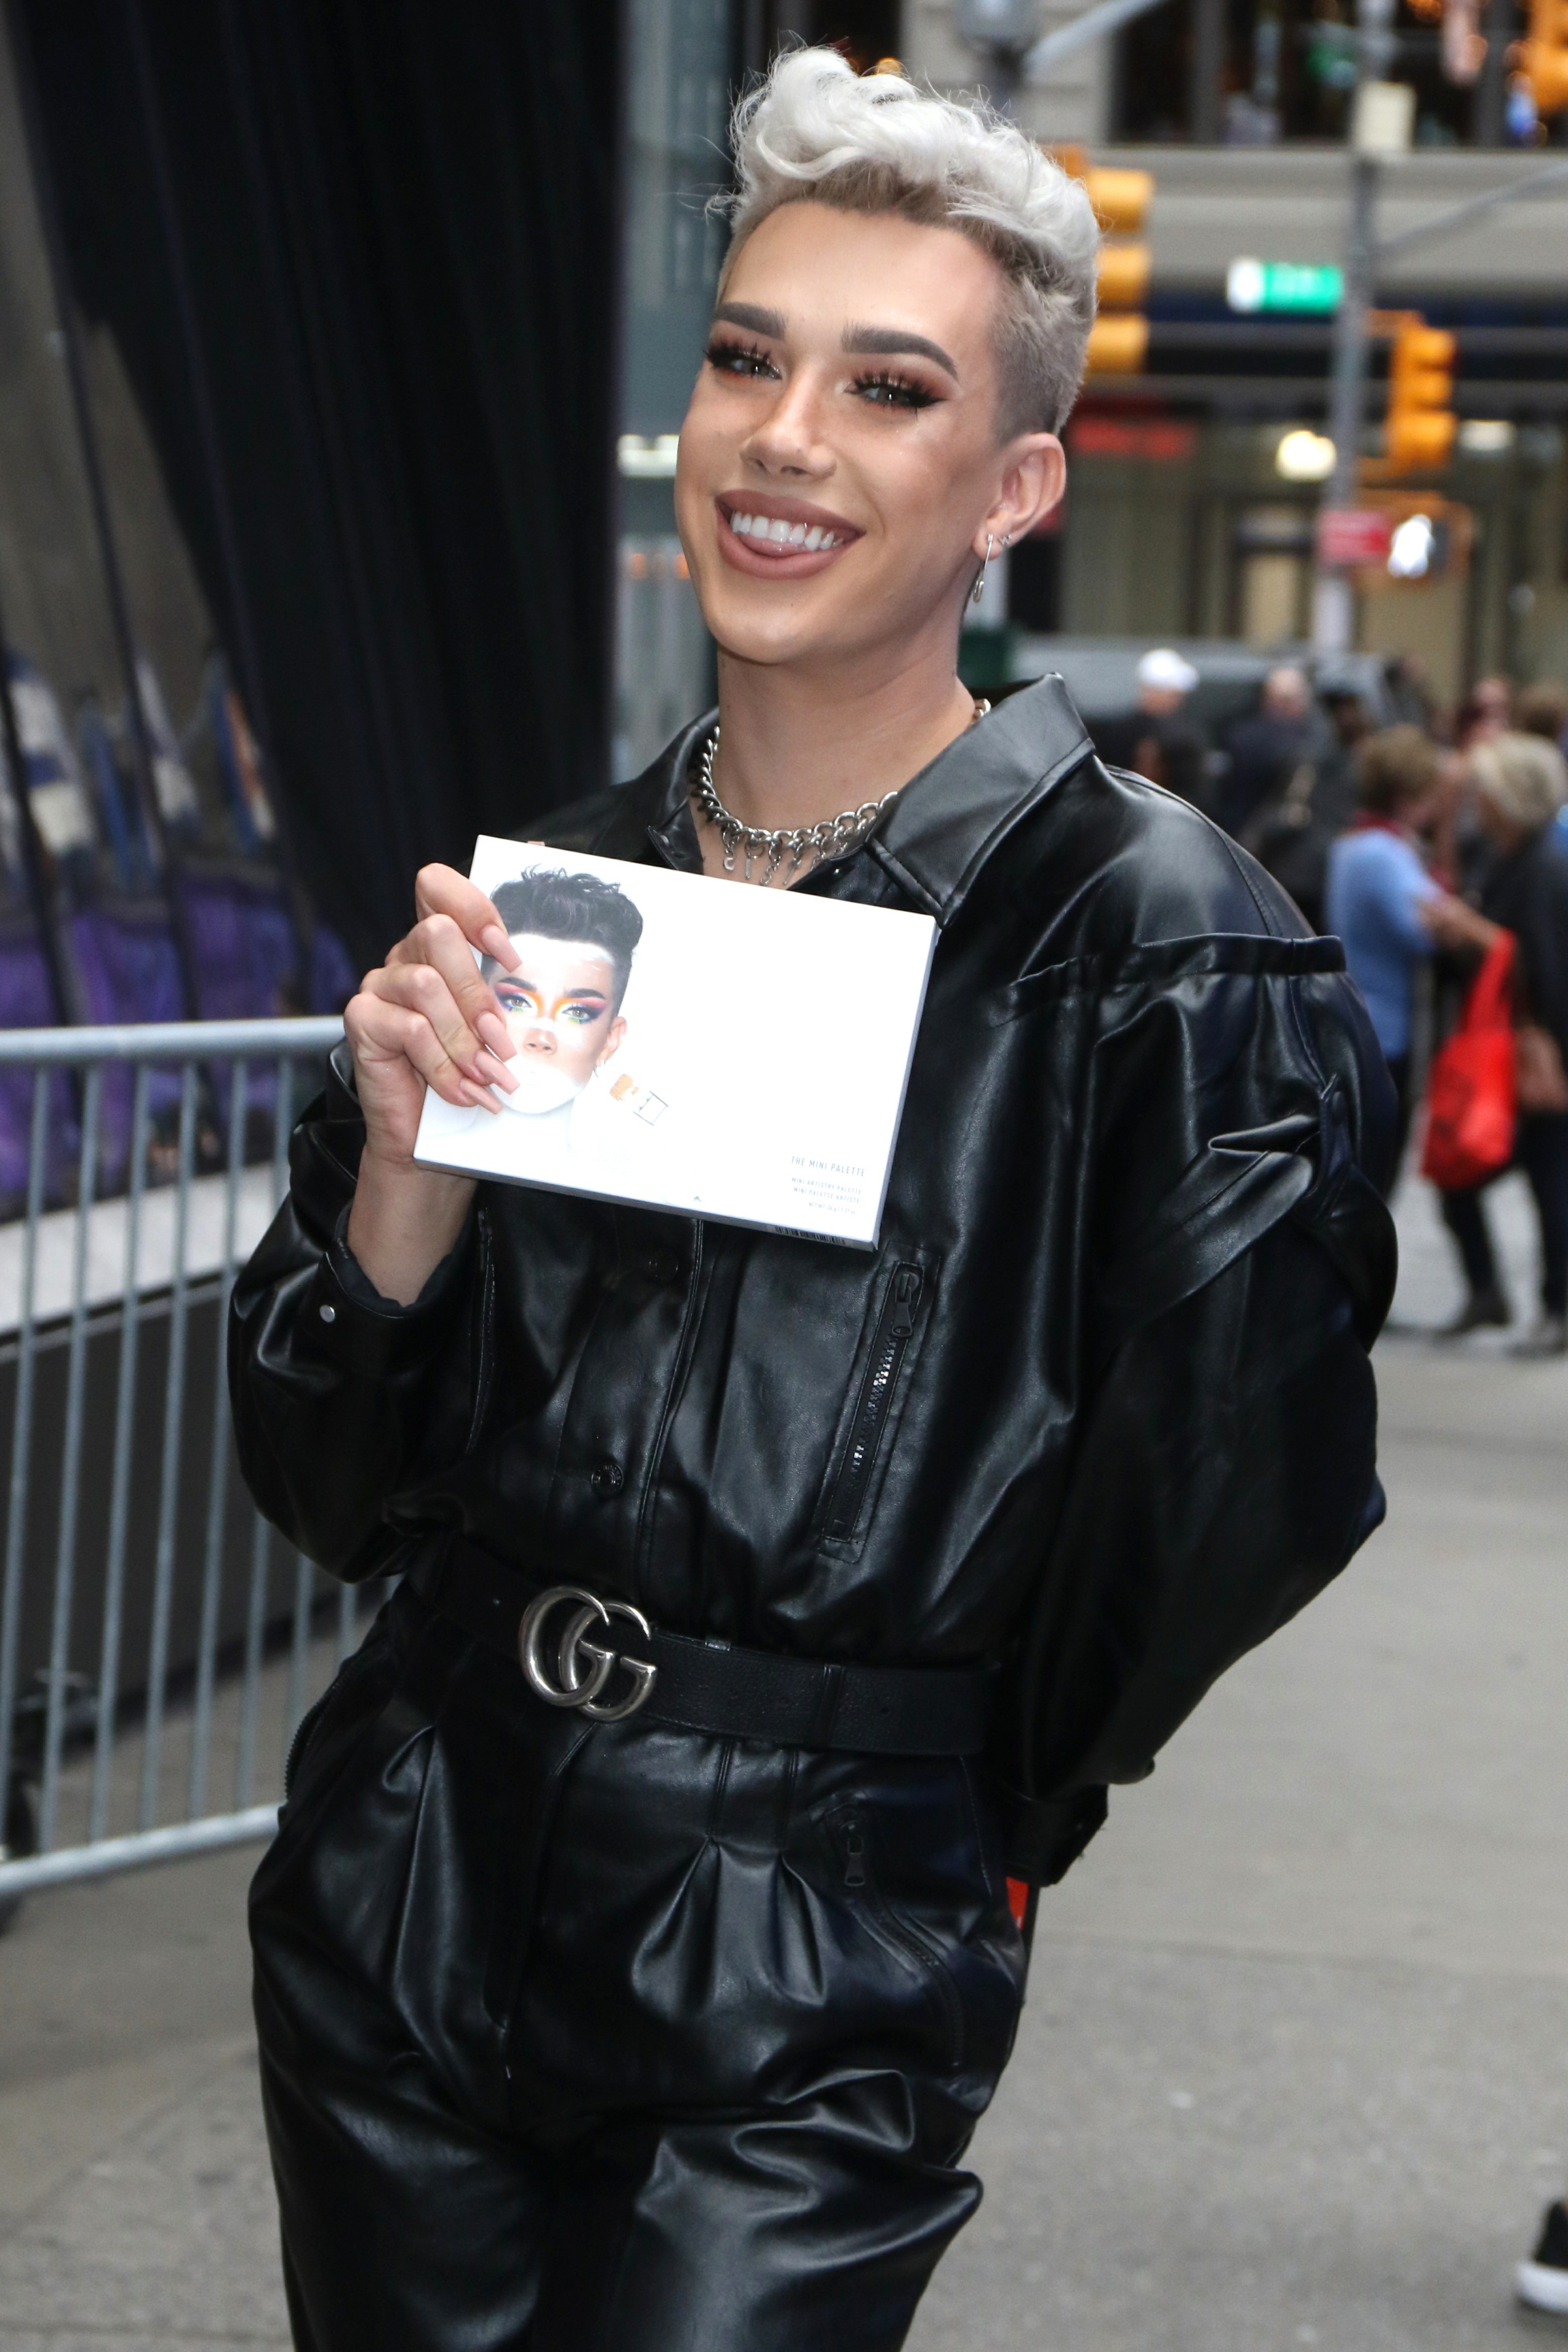 James Charles Wears Stylish Leather Jumpsuit in NYC for Press